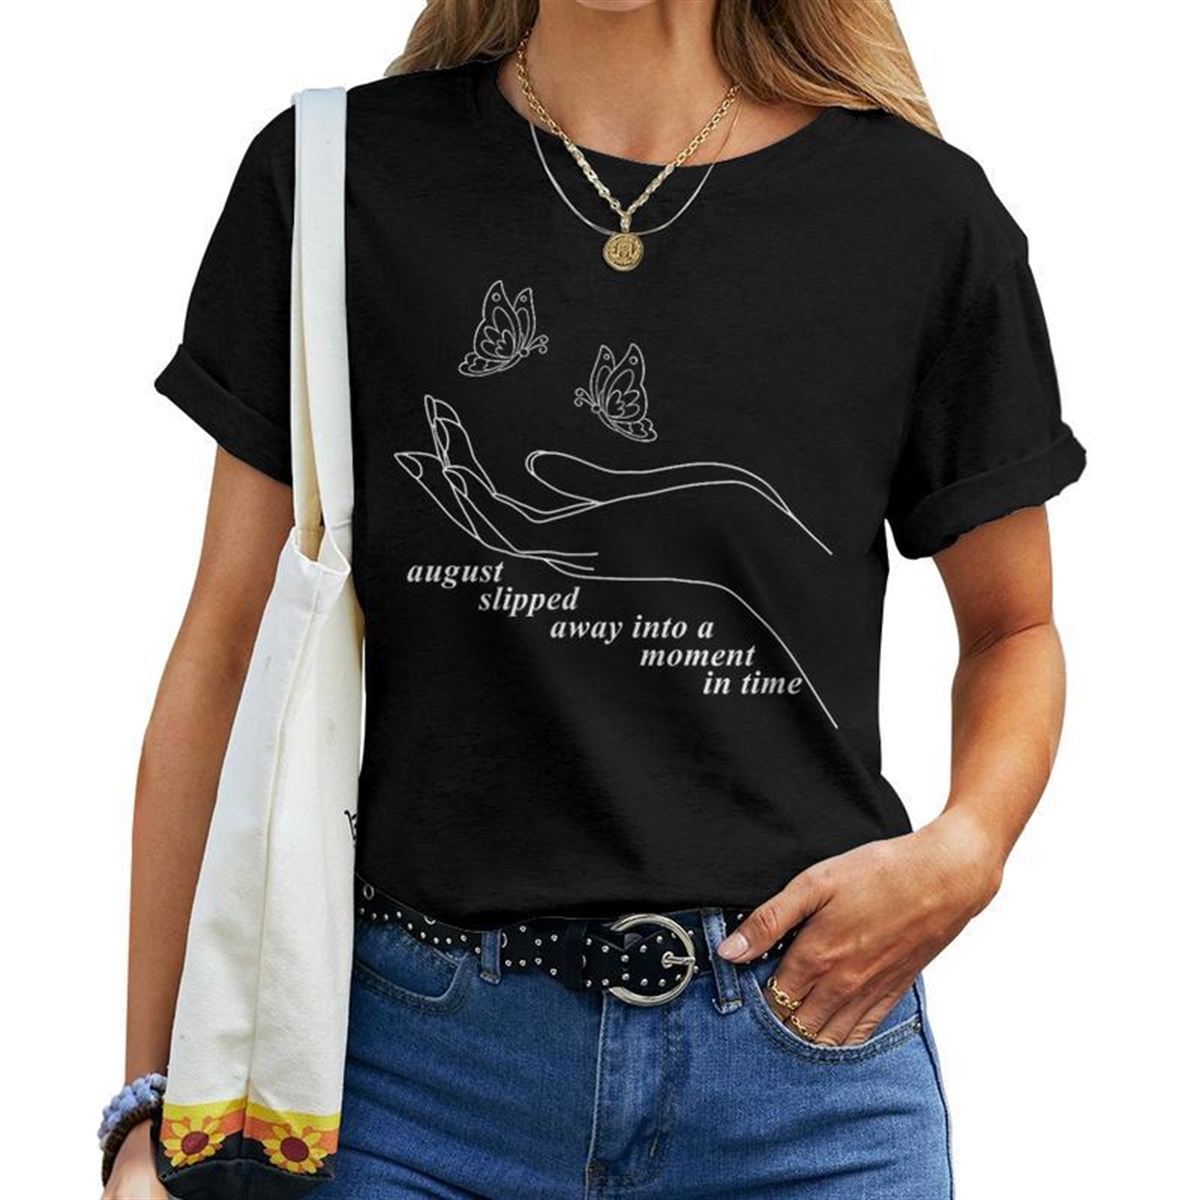 August Slipped Away August Slipped Away Into A Moment Women T-shirt